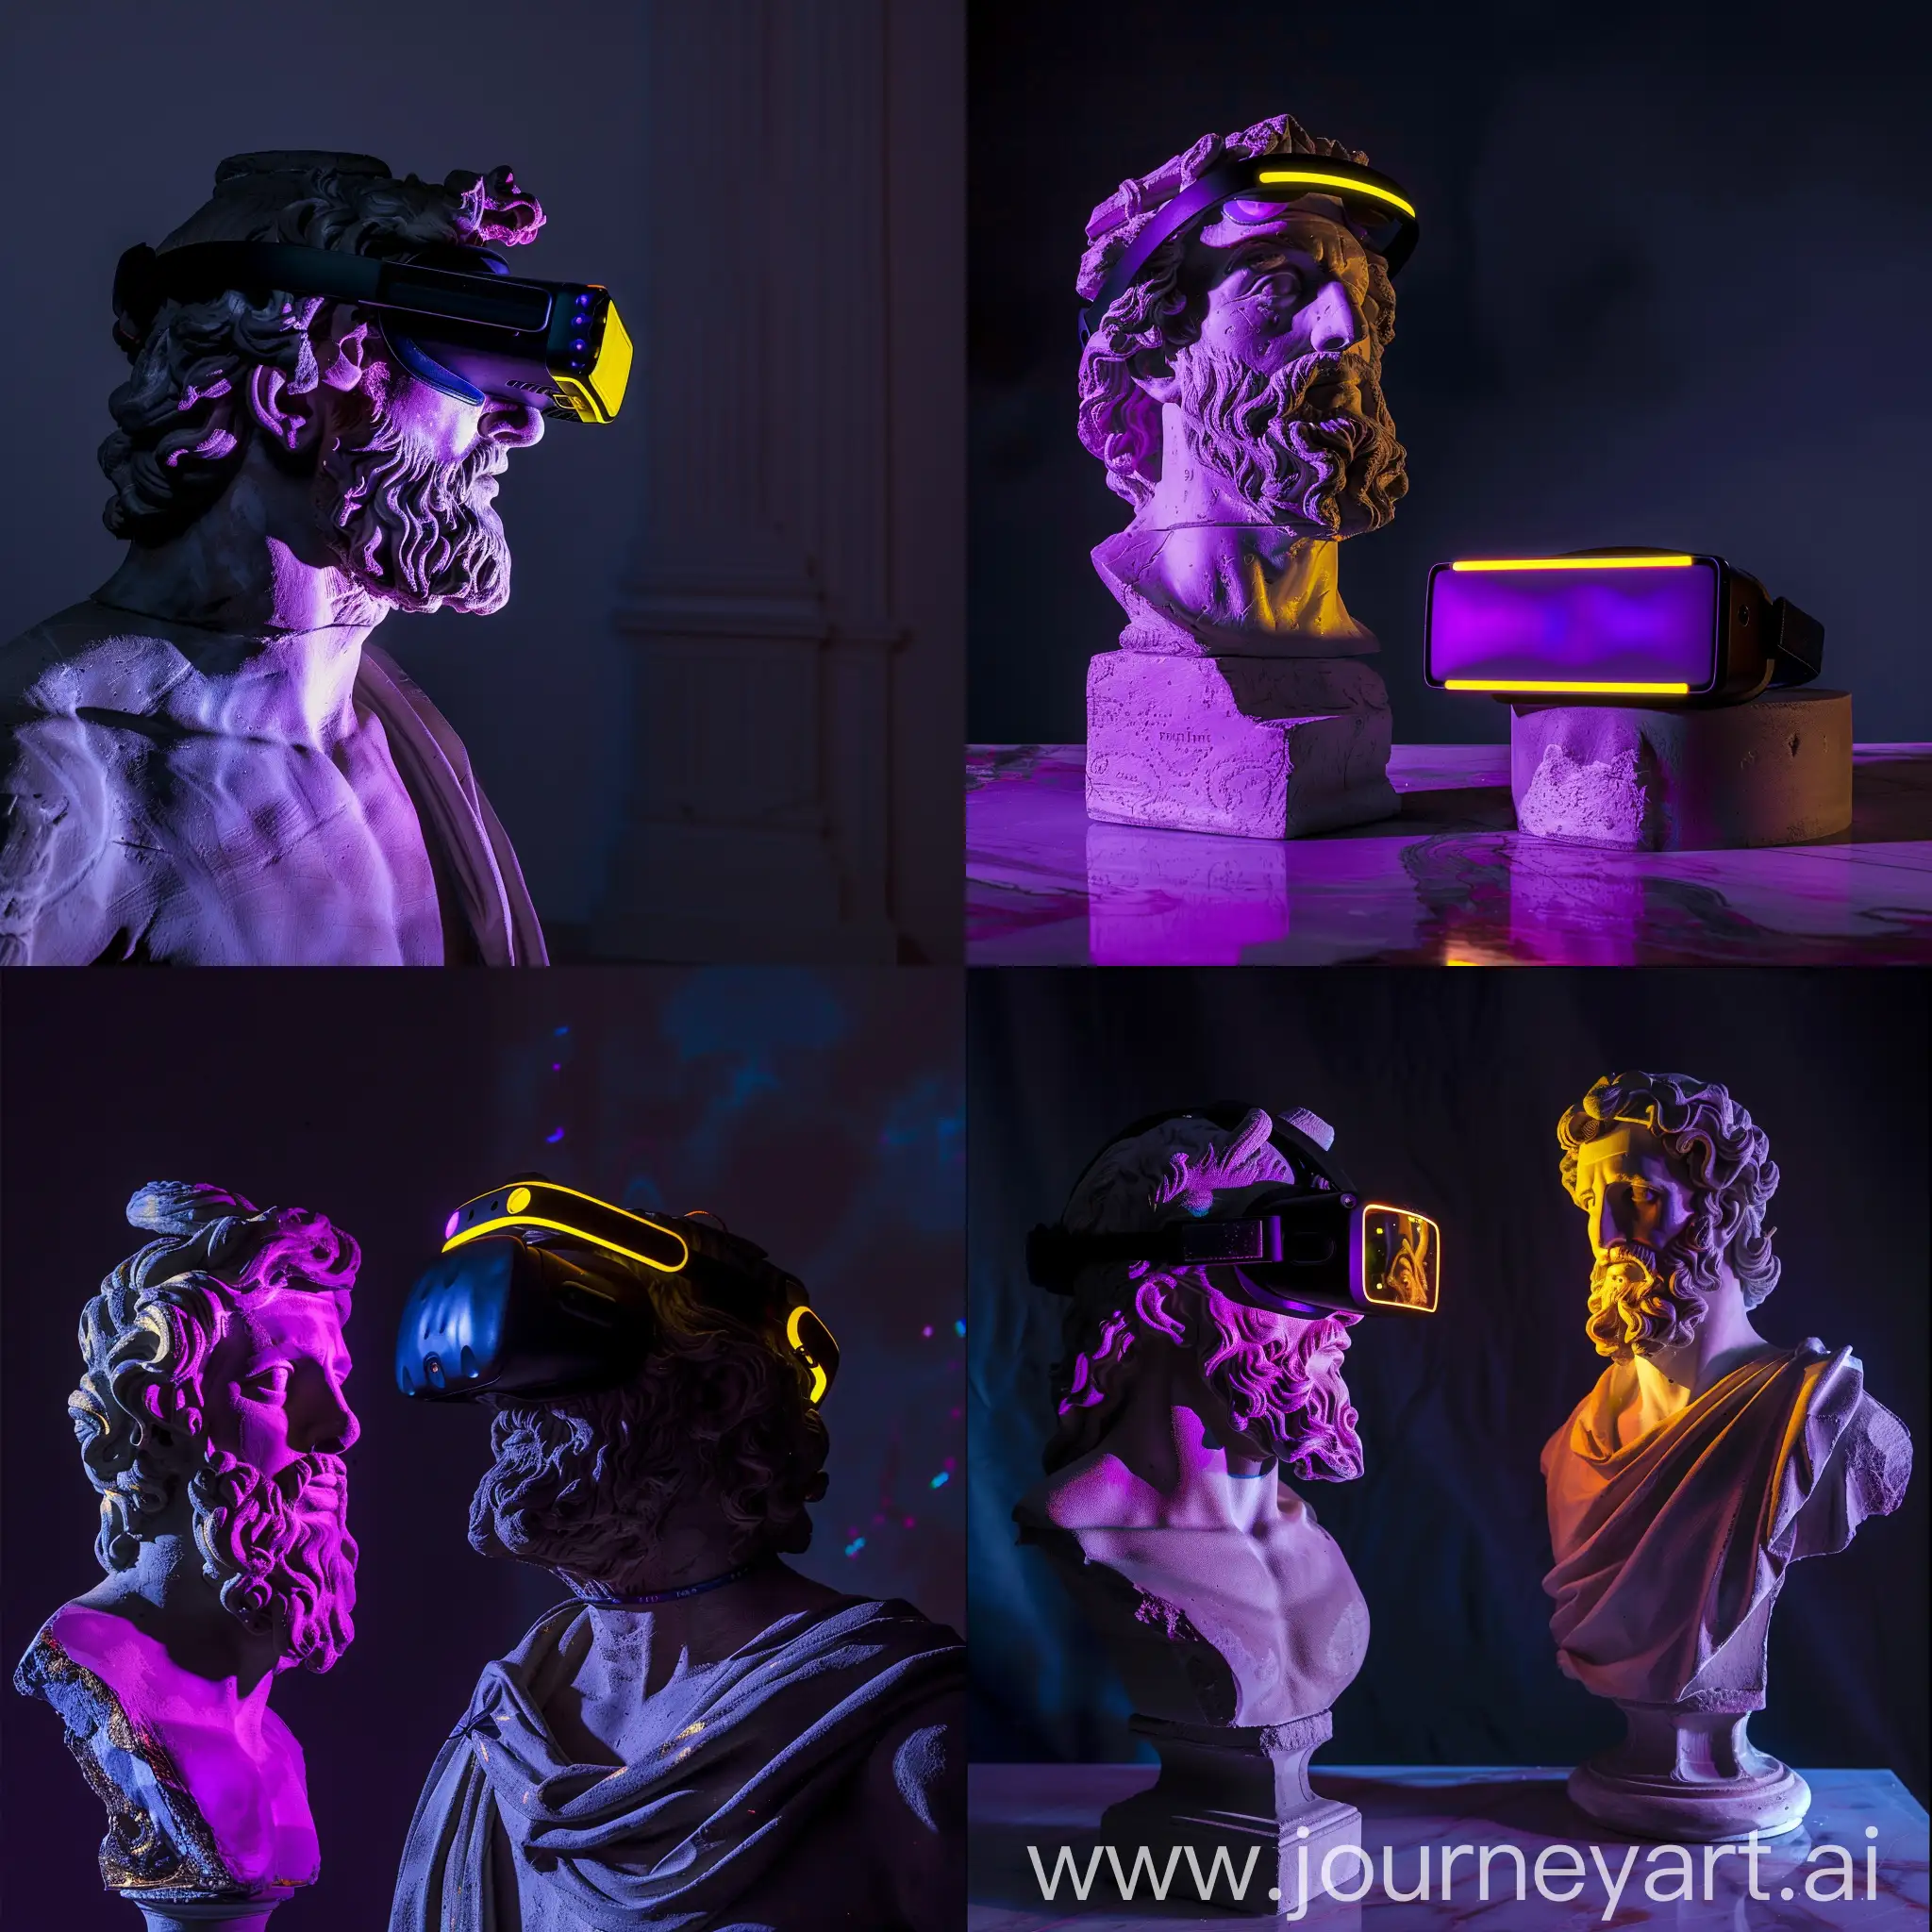 Zeus-Plaster-Sculpture-with-VR-Glasses-and-Purple-Reflections